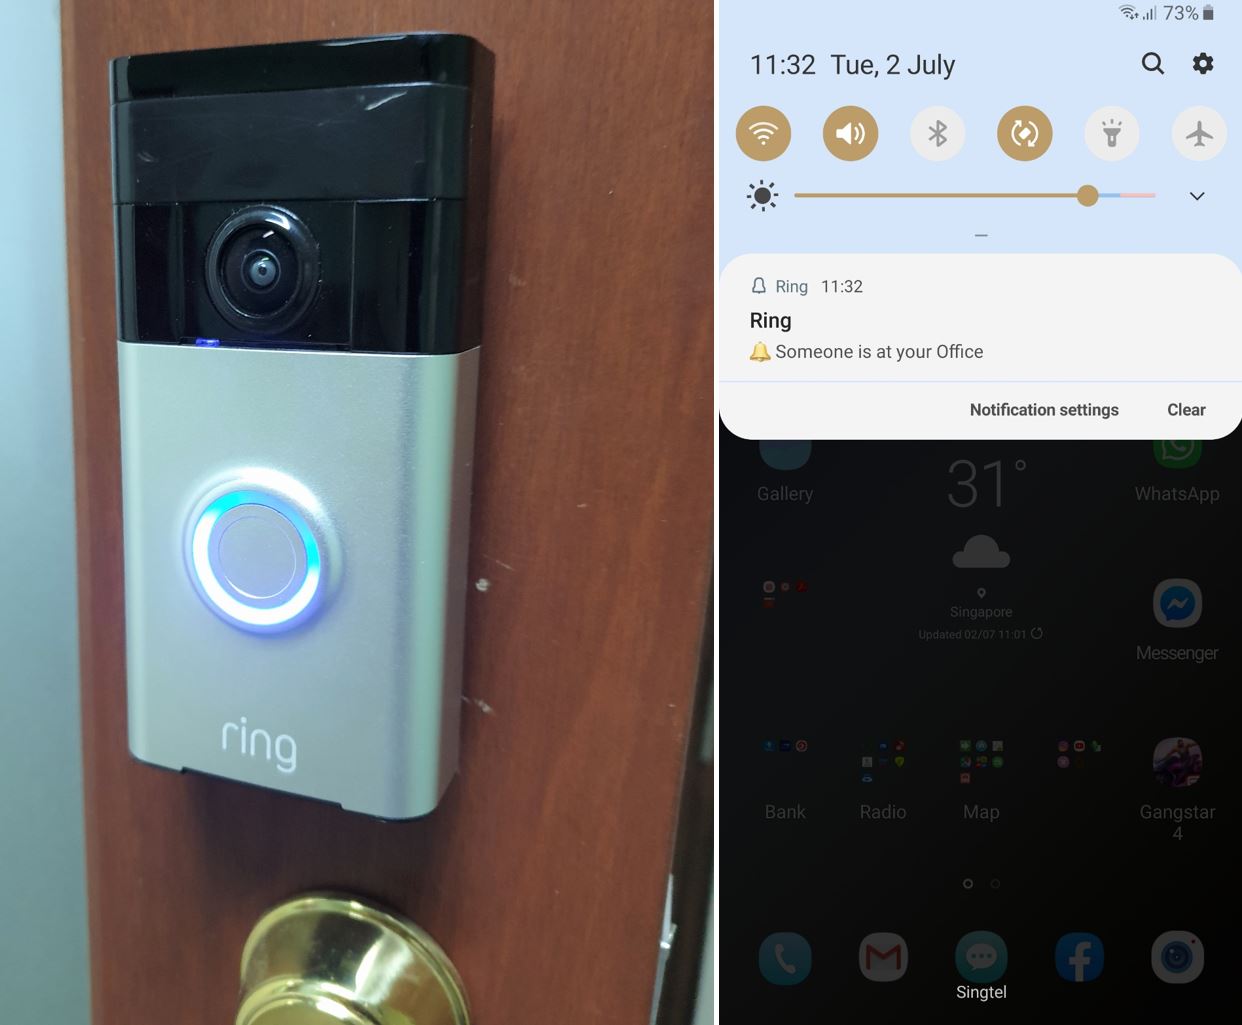 Doorbell linked to smartphone, screenshot of notification that doorbell is ringing and someone is at the office.